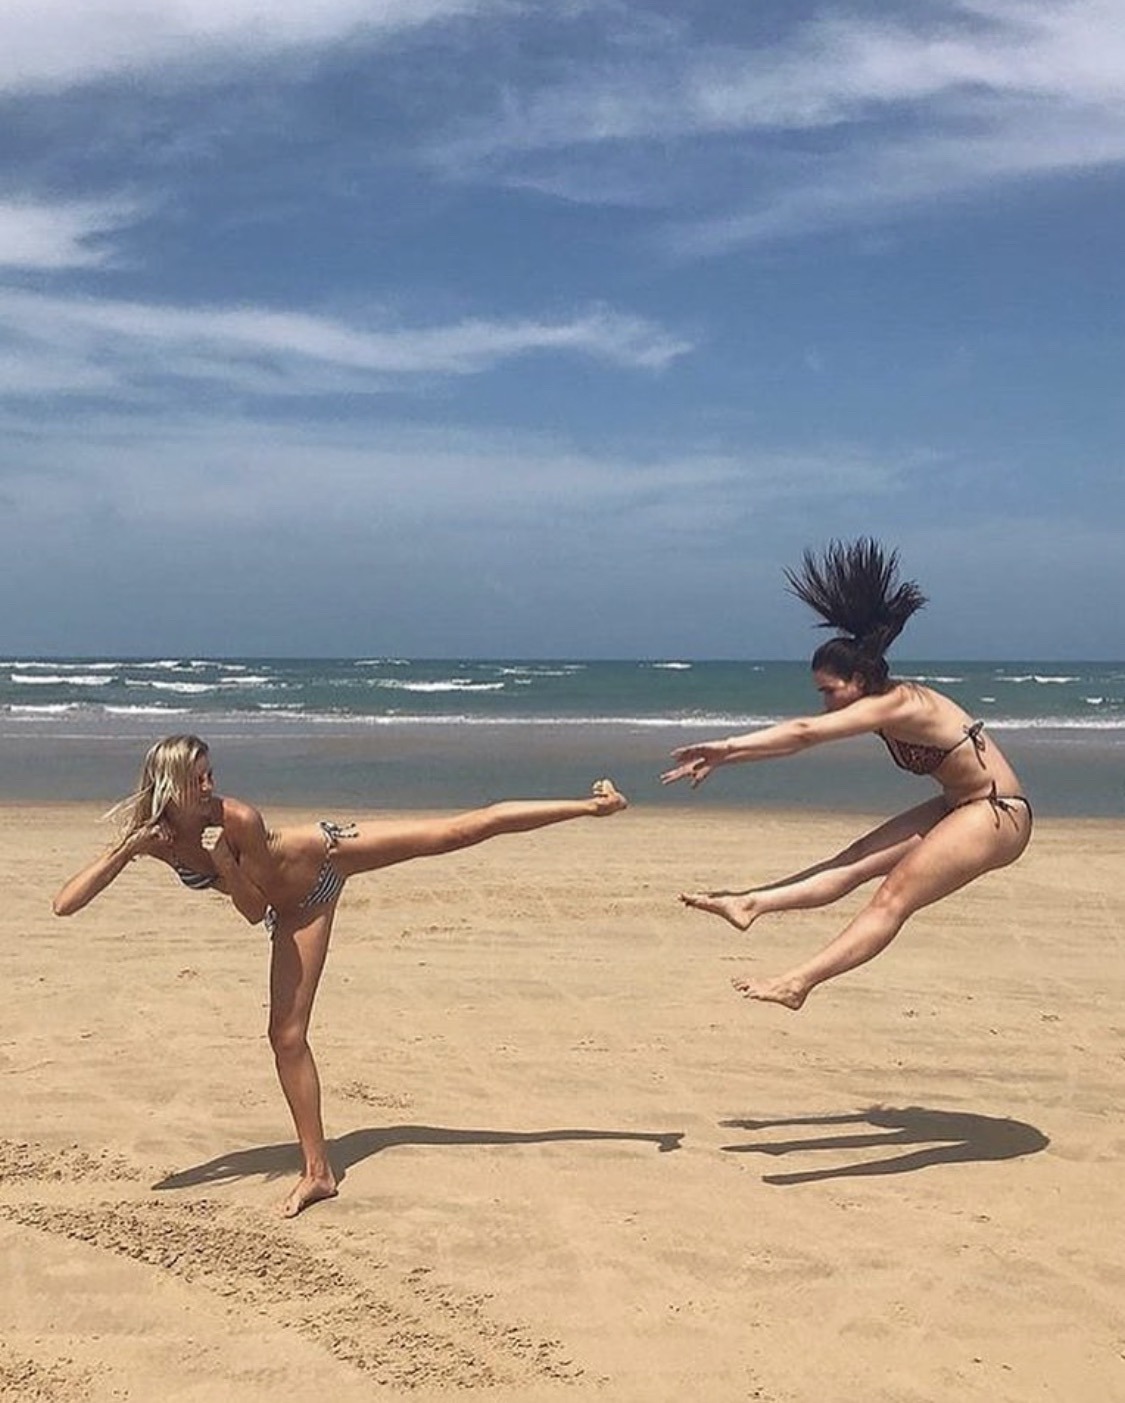 Why not try some action in beach photos